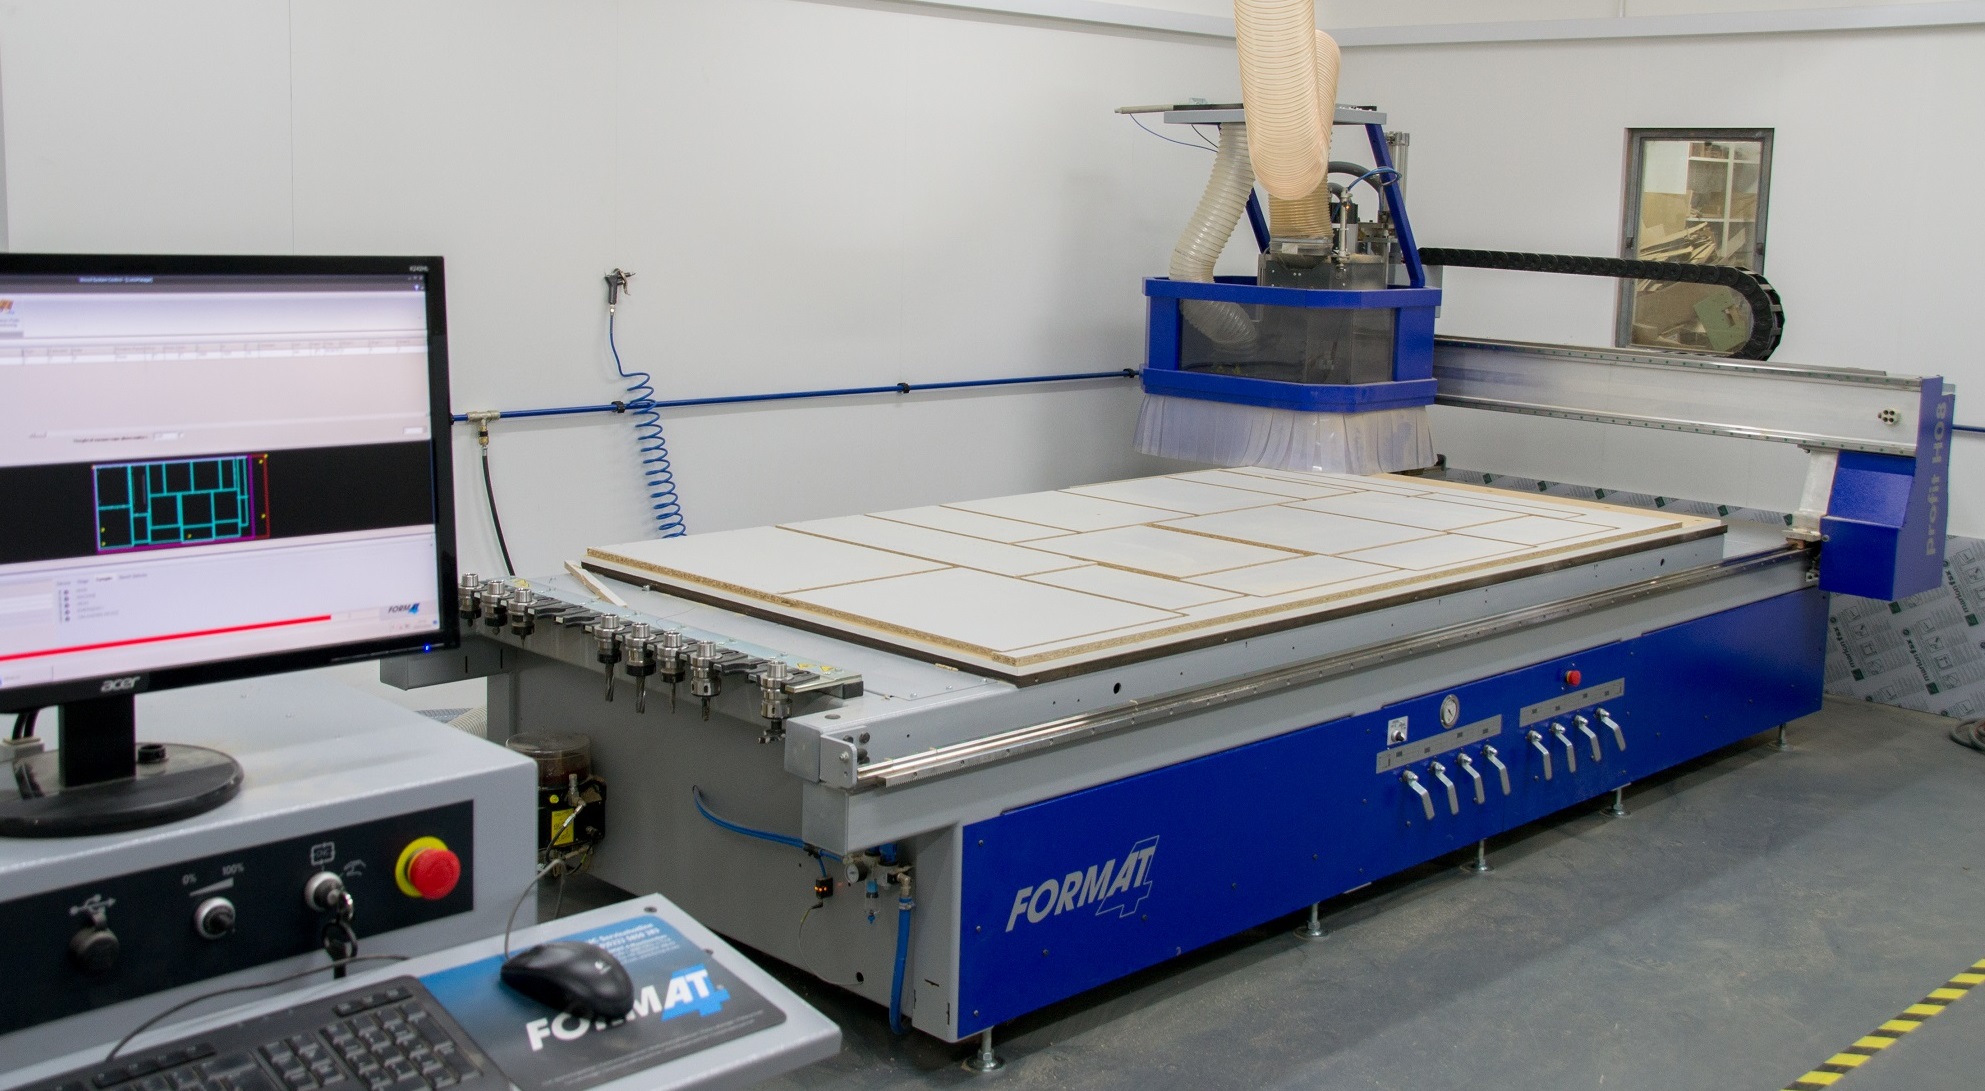 Our CNC machine based at the Partridge Kitchens workshop